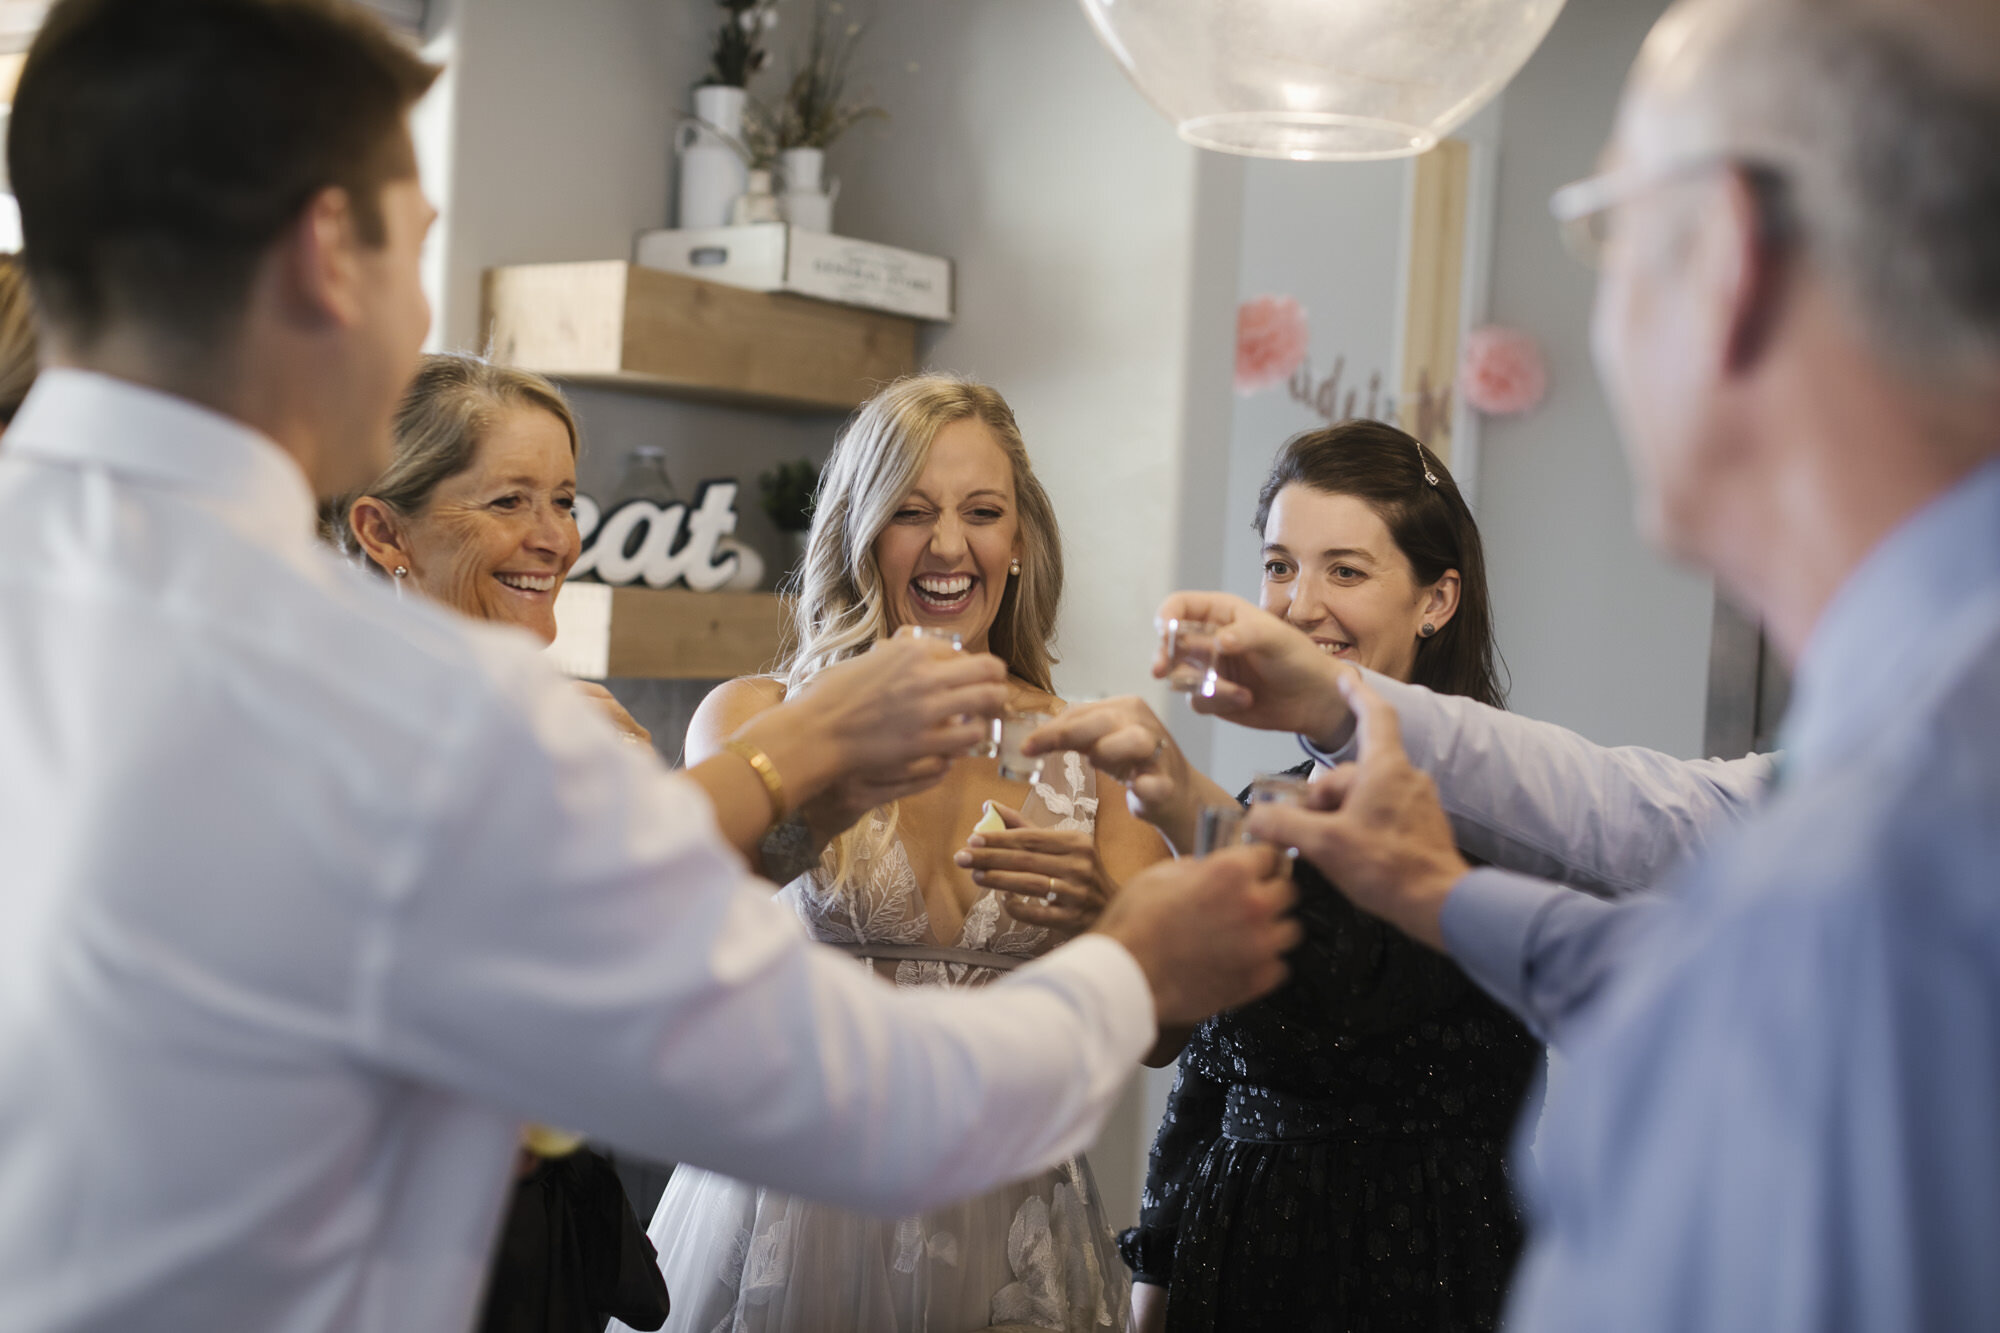 Bride and family take a wedding day tequila shot together as a group